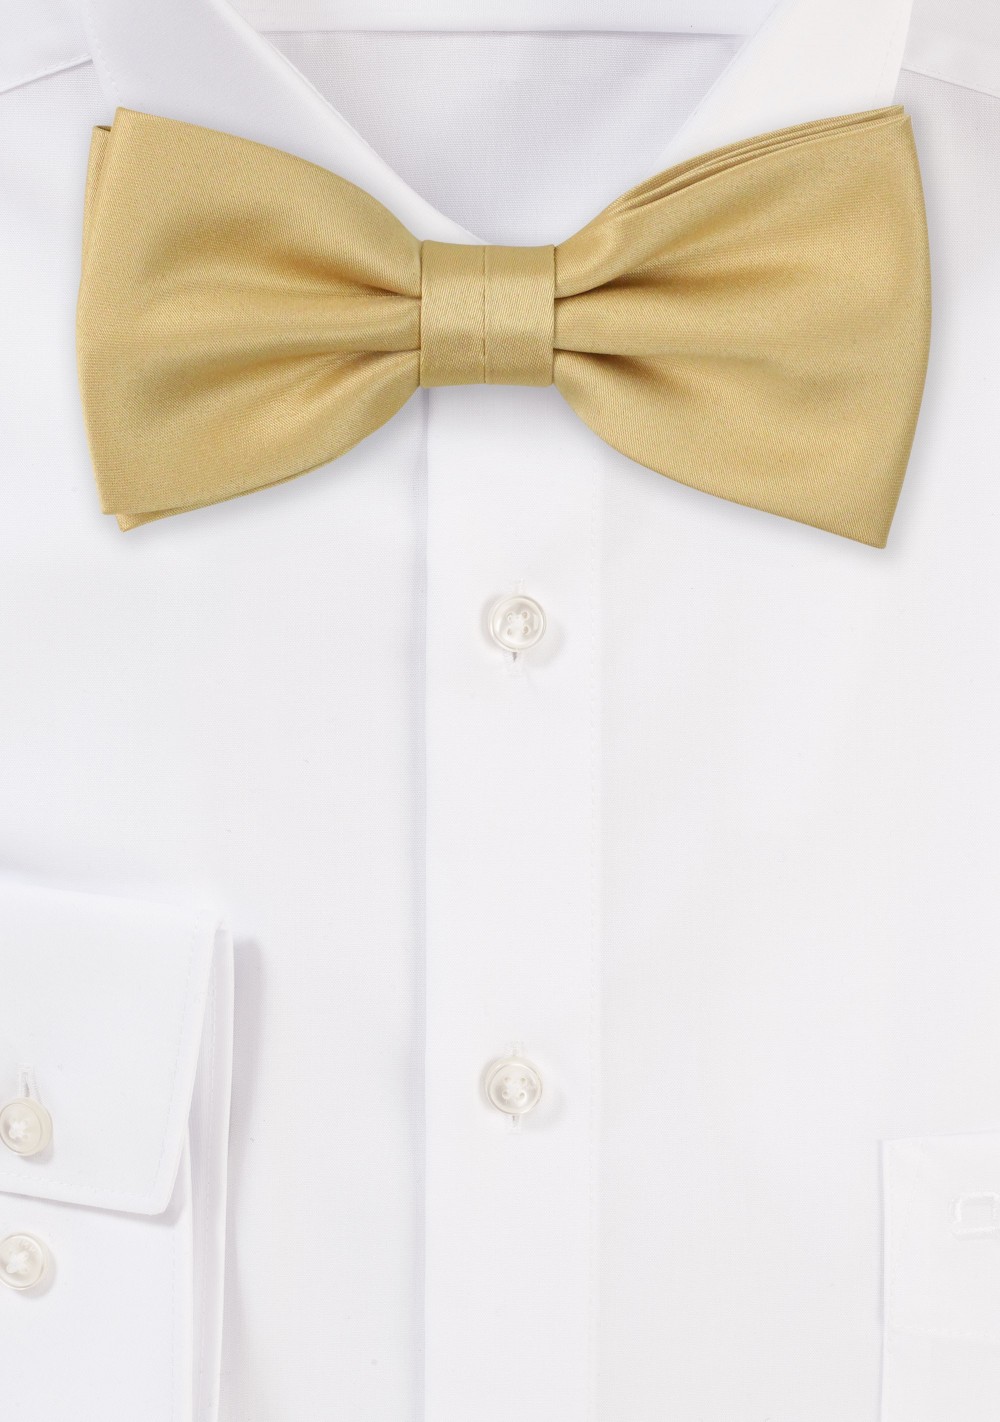 Satin Bow Tie in Golden Color